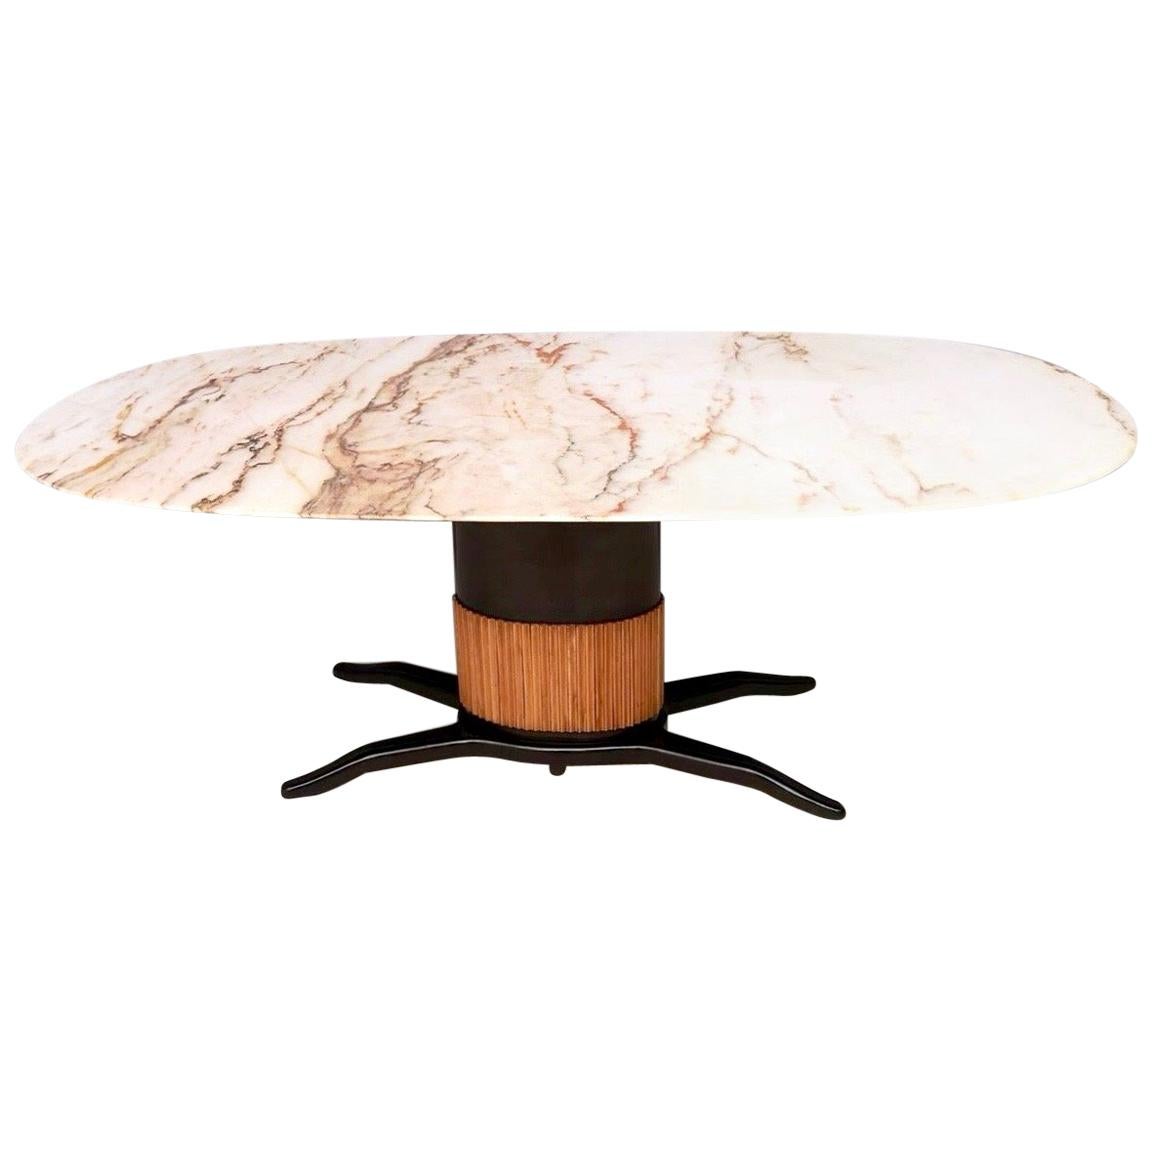 Dining Table Ascribable to Paolo Buffa with a Pink Marble Top, Italy, 1950s